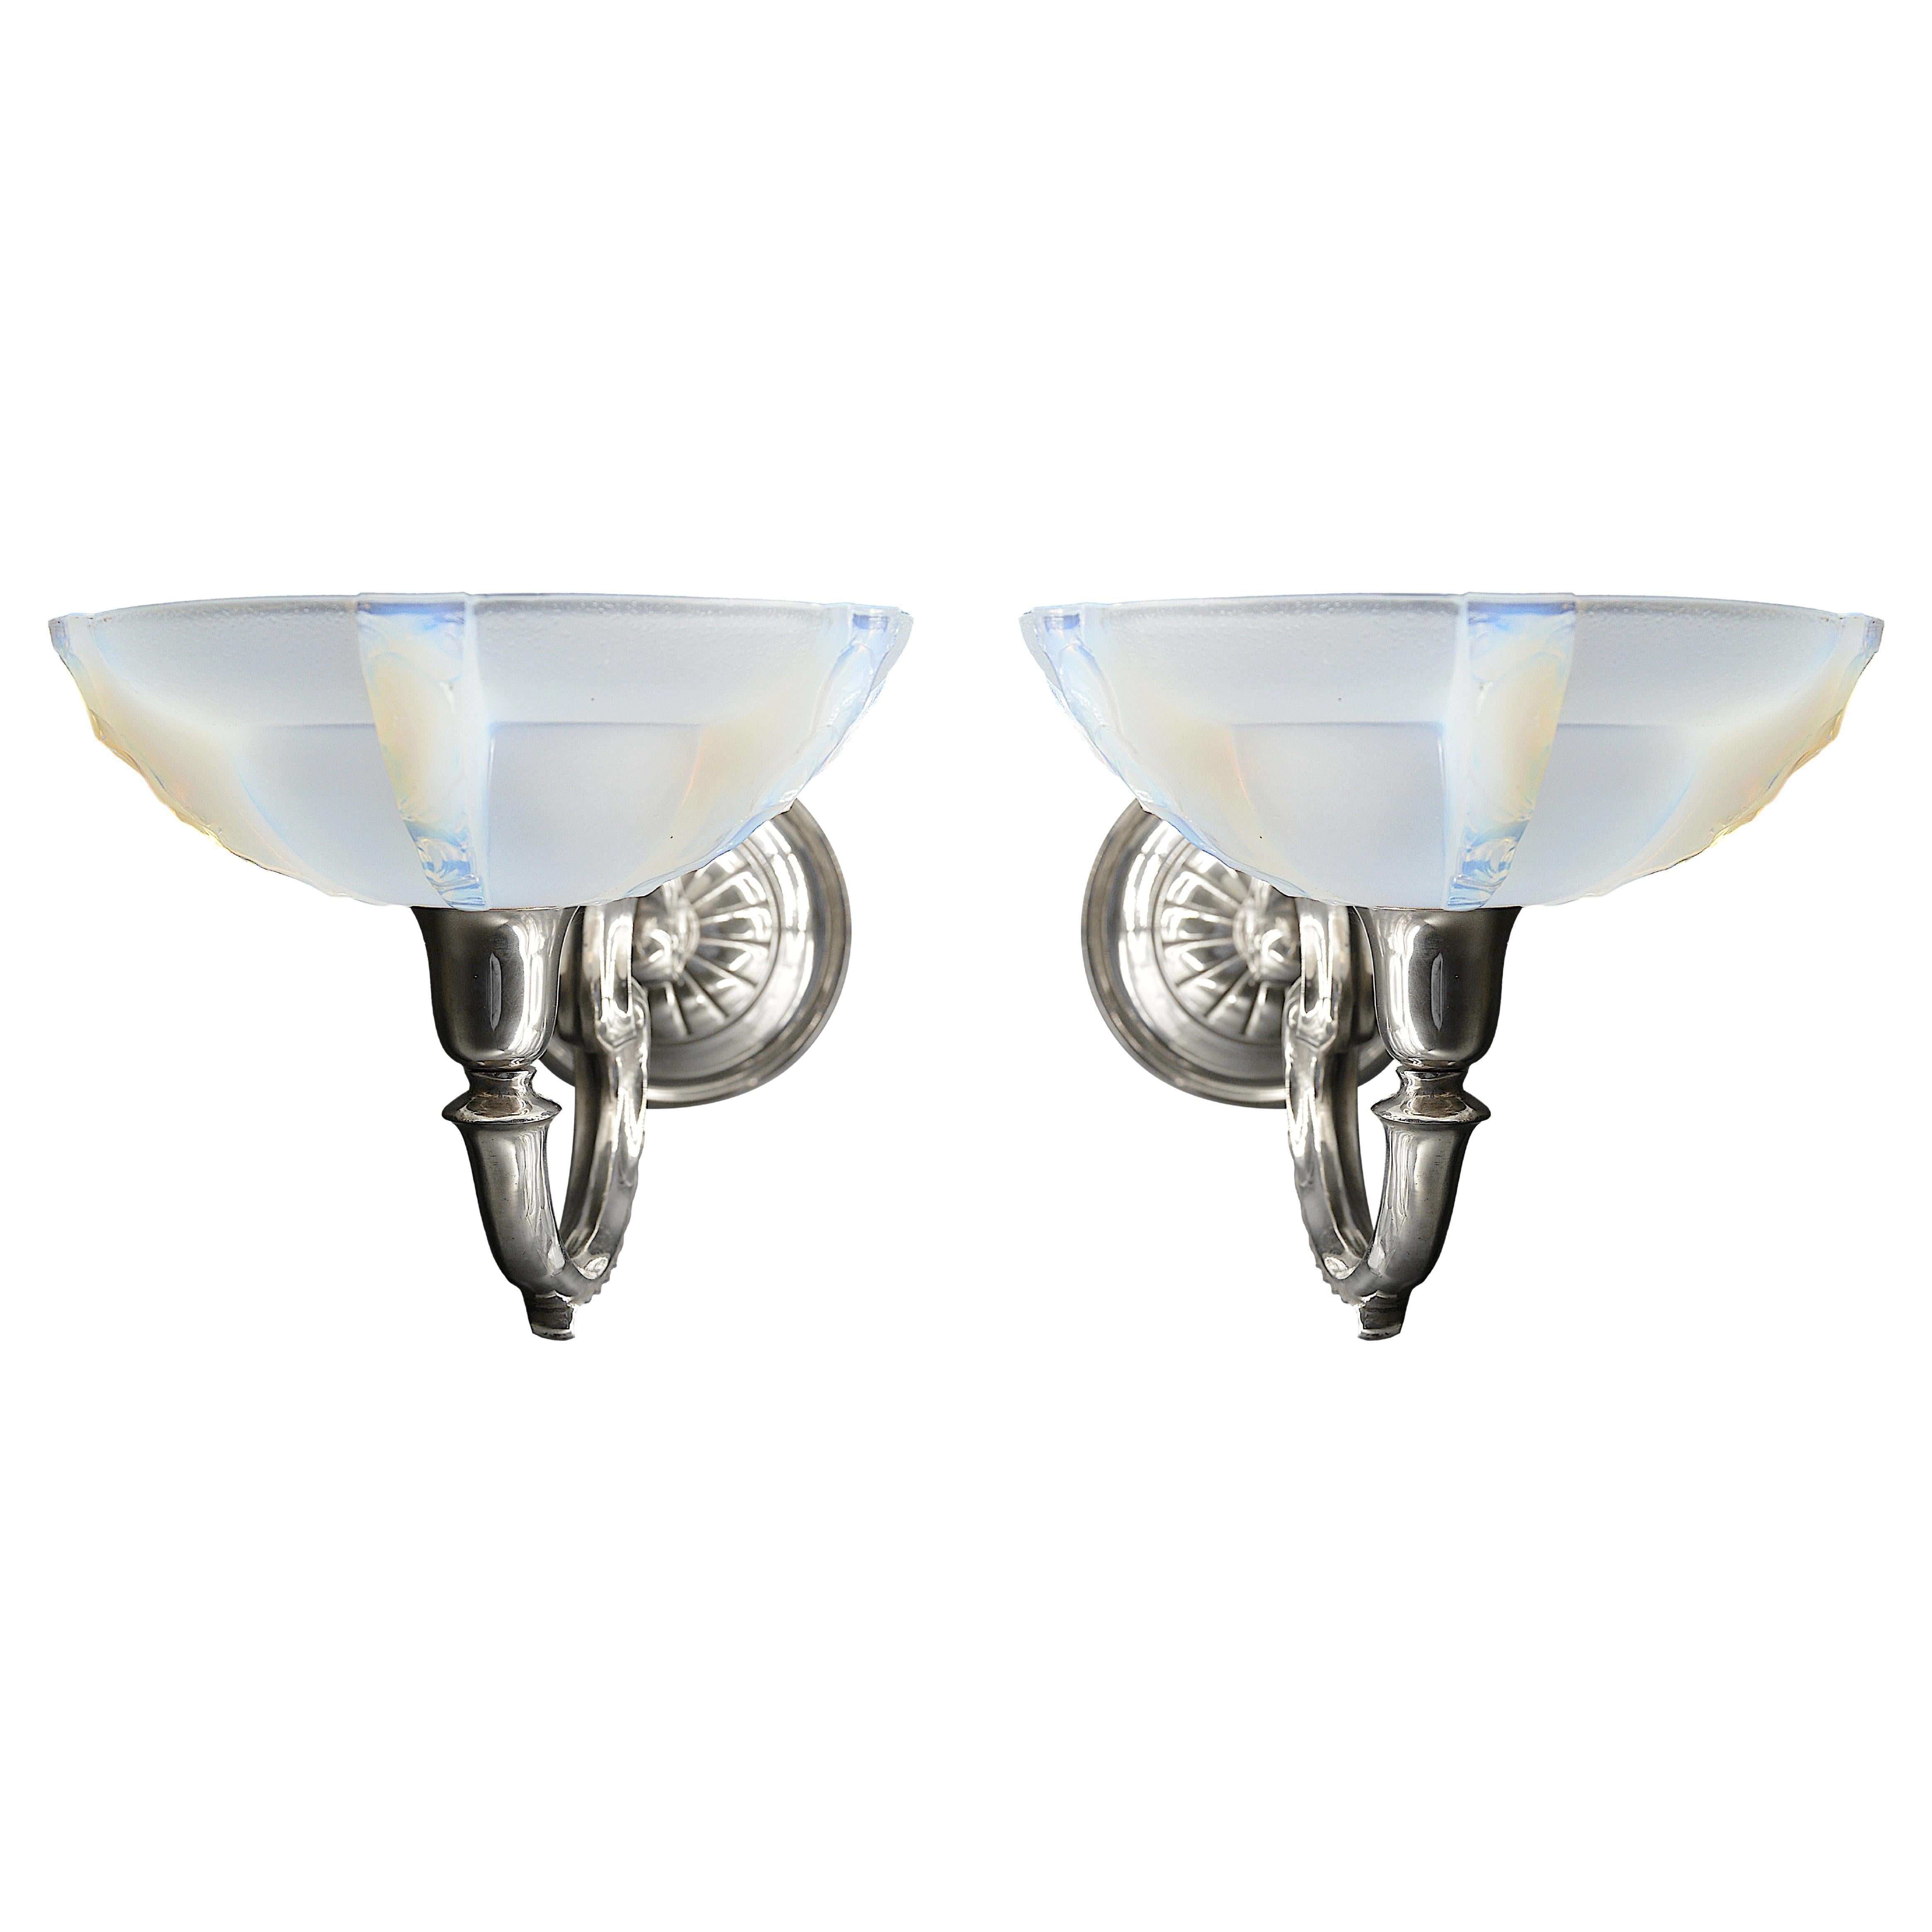 Petitot / Gauthier French Art Deco Wall Sconce Pair, 1930s For Sale